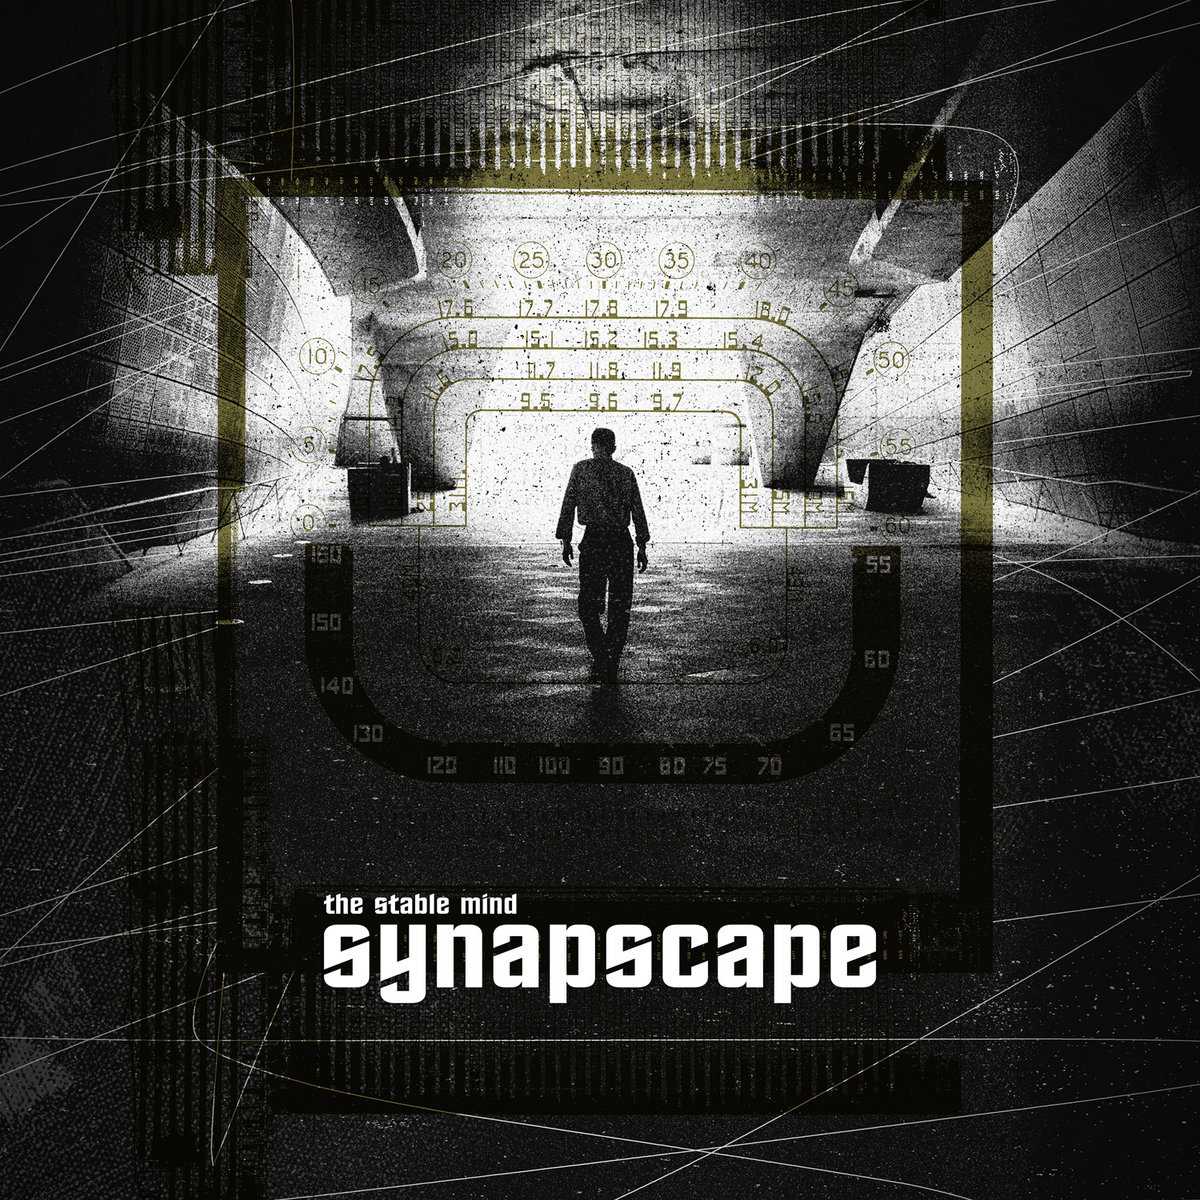 Synapscape, “The Stable Mind”